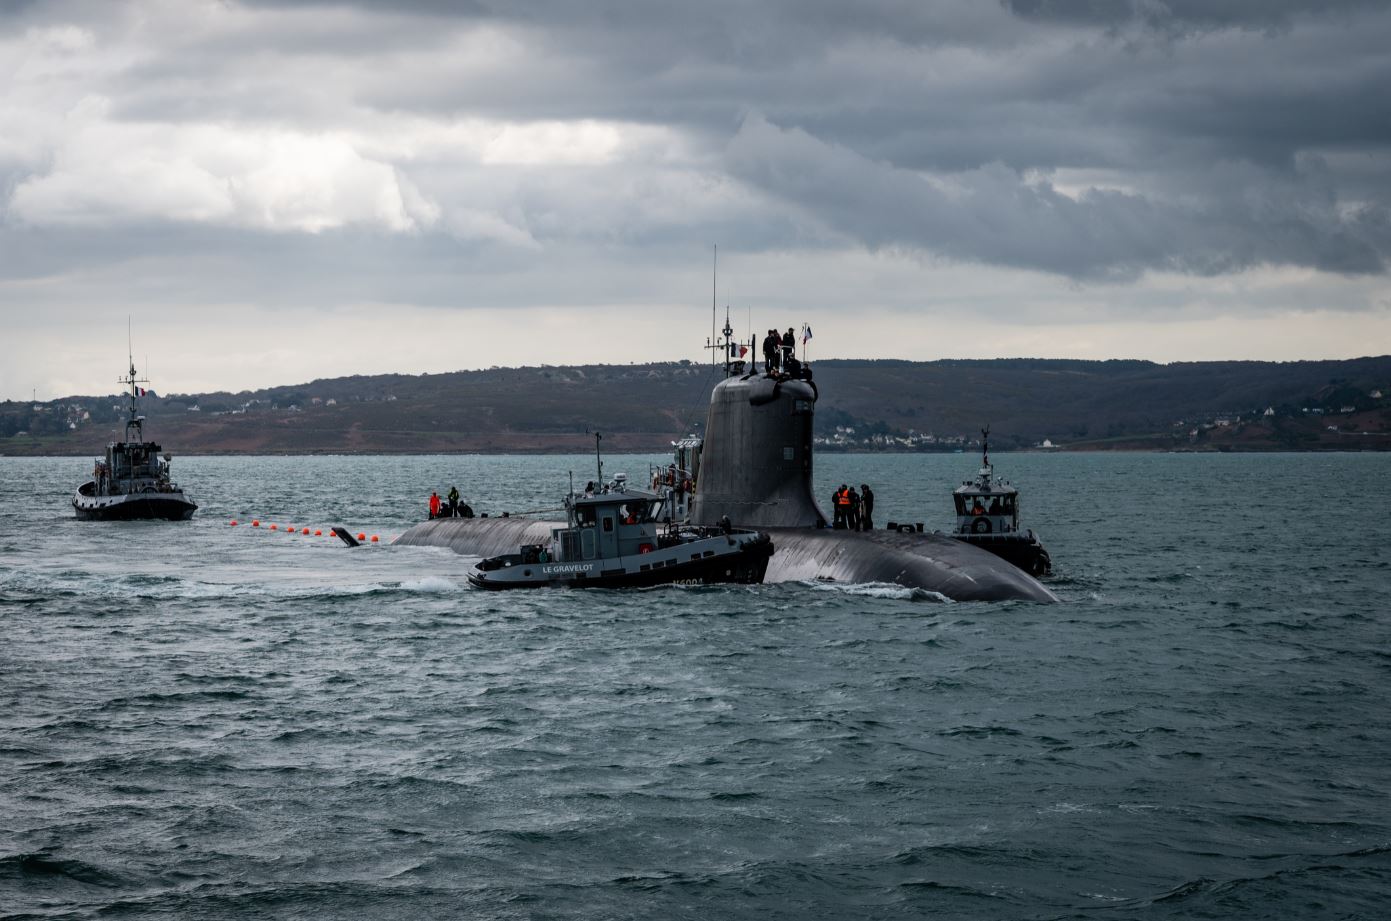 The Duguay-Trouin, second of the French Navy's six Barracuda-class nuclear-powered attack submarines, prepares to leave her berth in Charbourg to begin her sea trials.